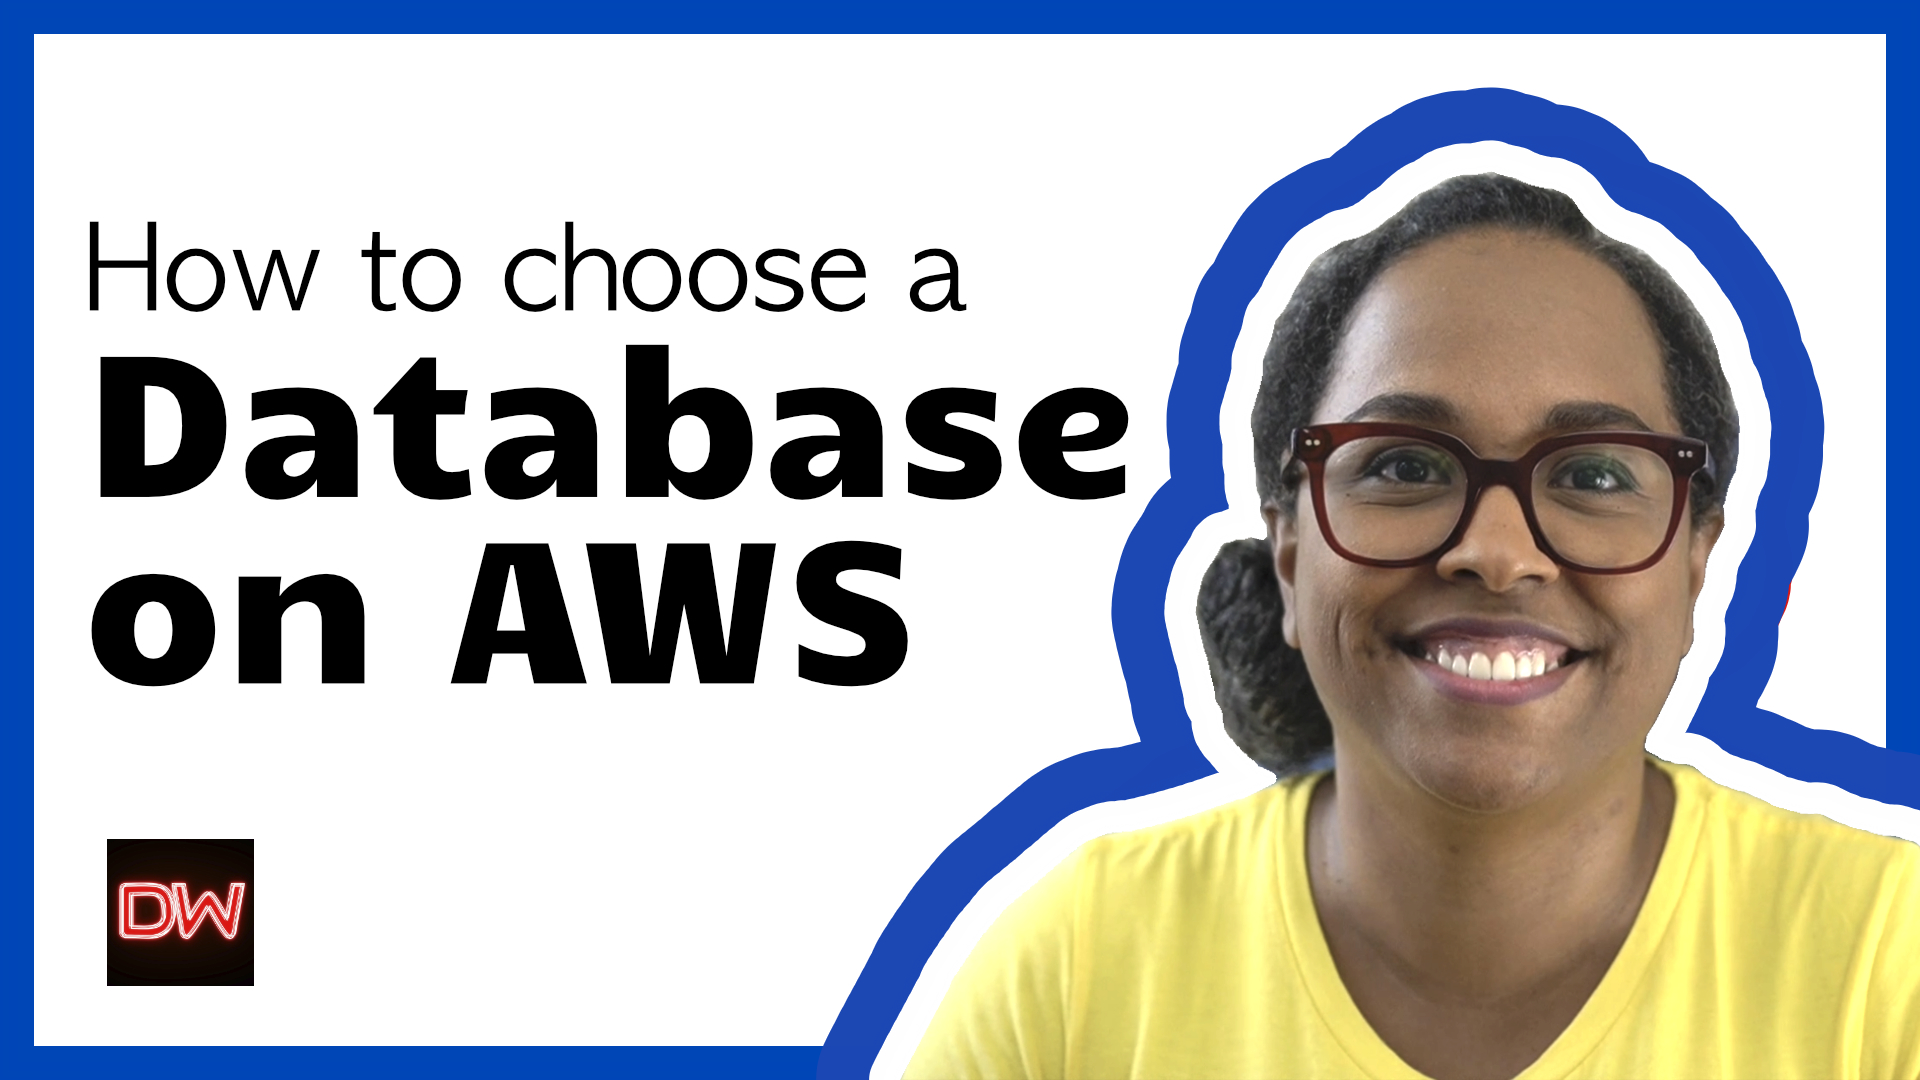 How to choose a database on AWS